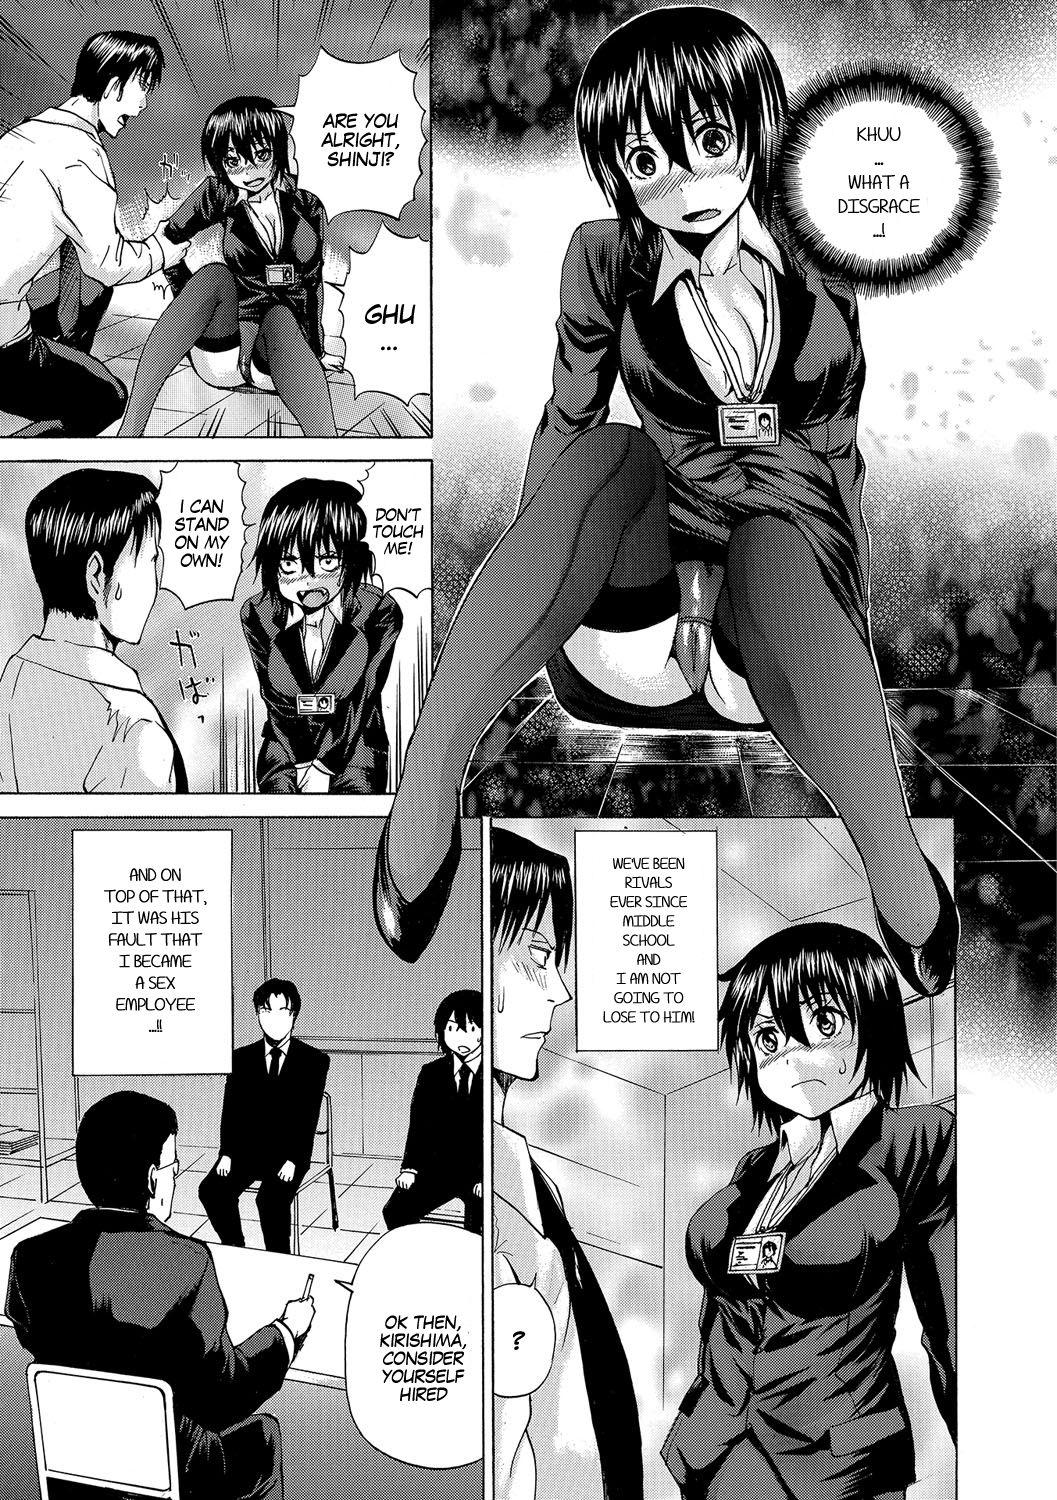 Young Old Seishain ni Naru Tame Ore wa... | I wanted To Get Employed And So I... Compilation - Page 3